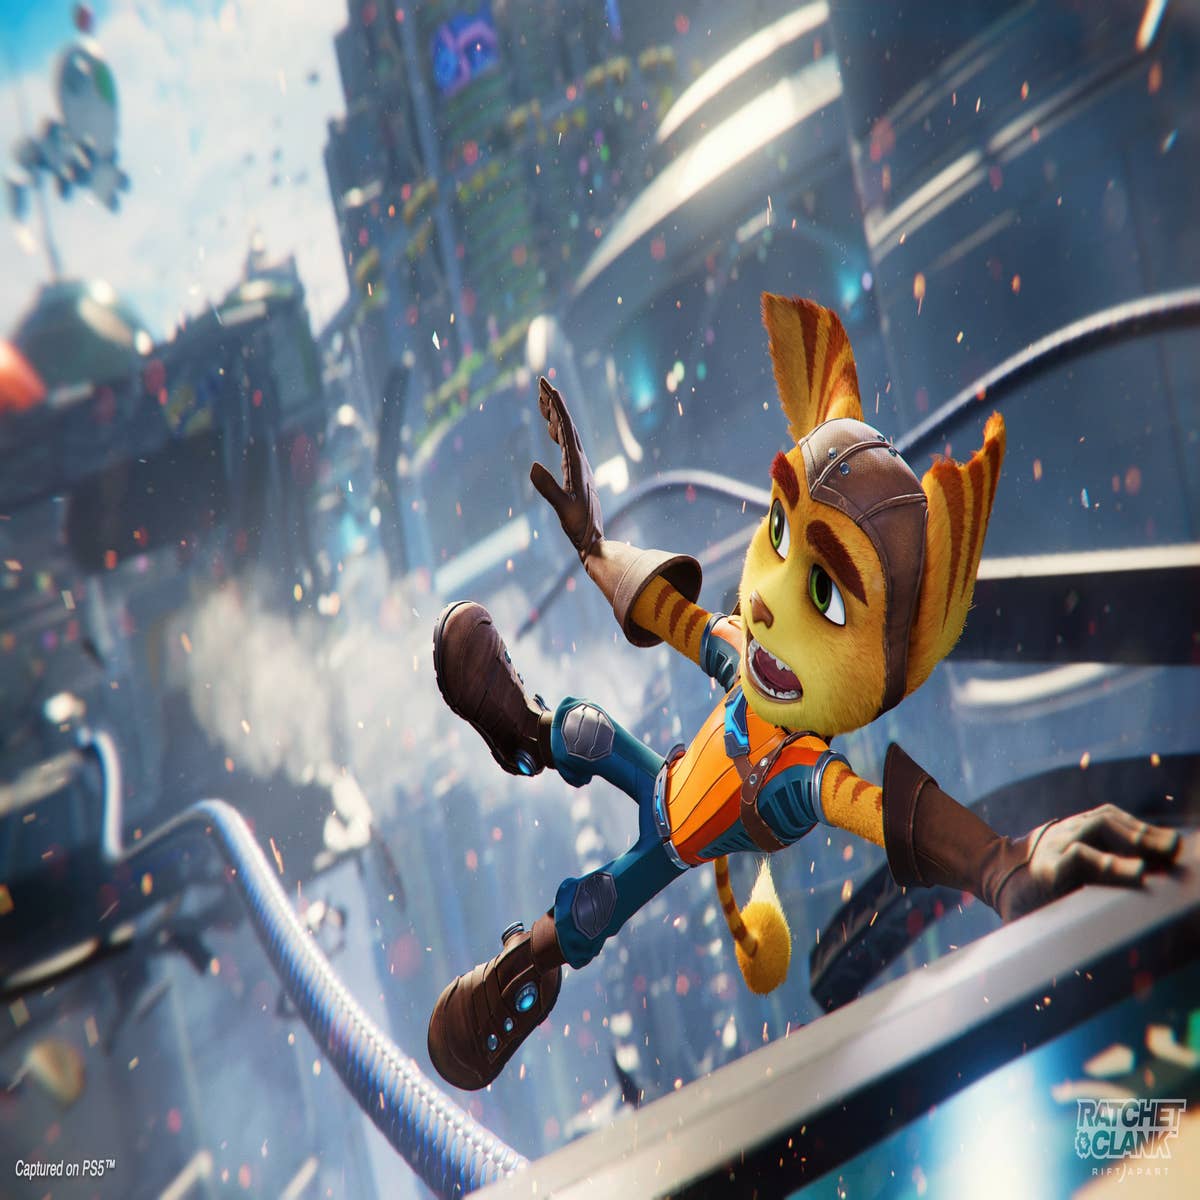 Ratchet and Clank PS5 Load Times via Ships and Rifts Explained